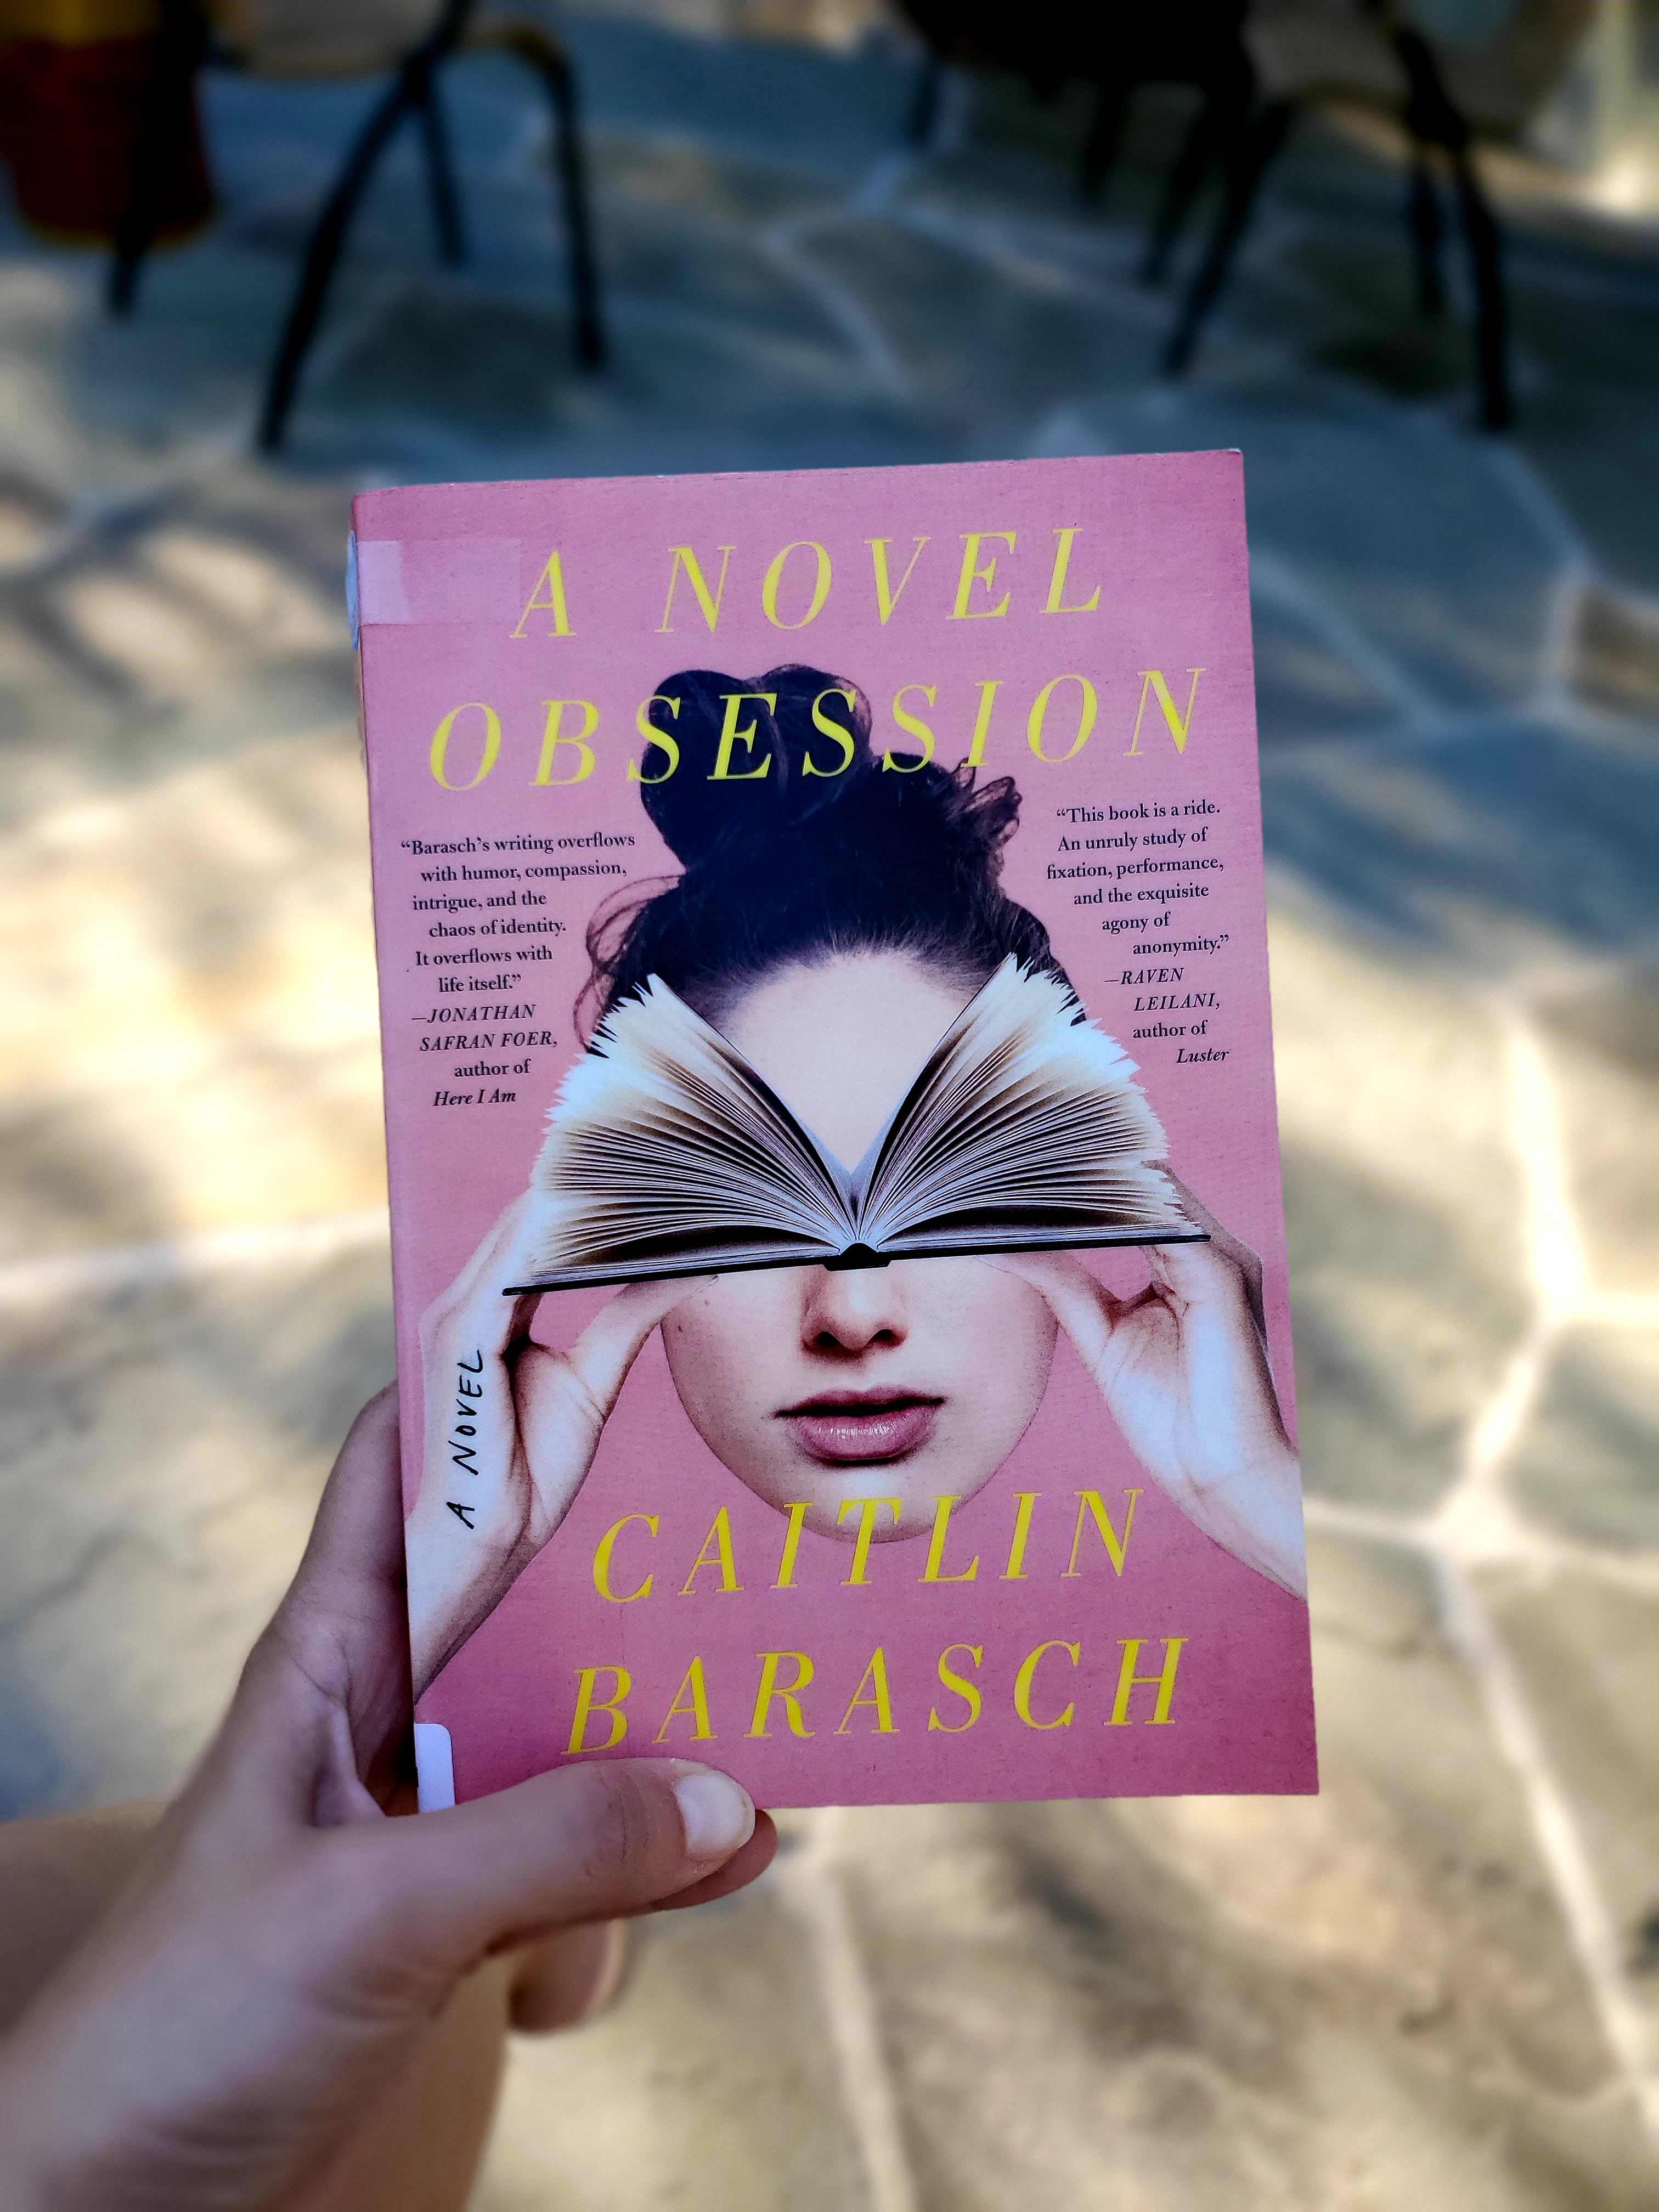 Book Review of A NOVEL OBSESSION